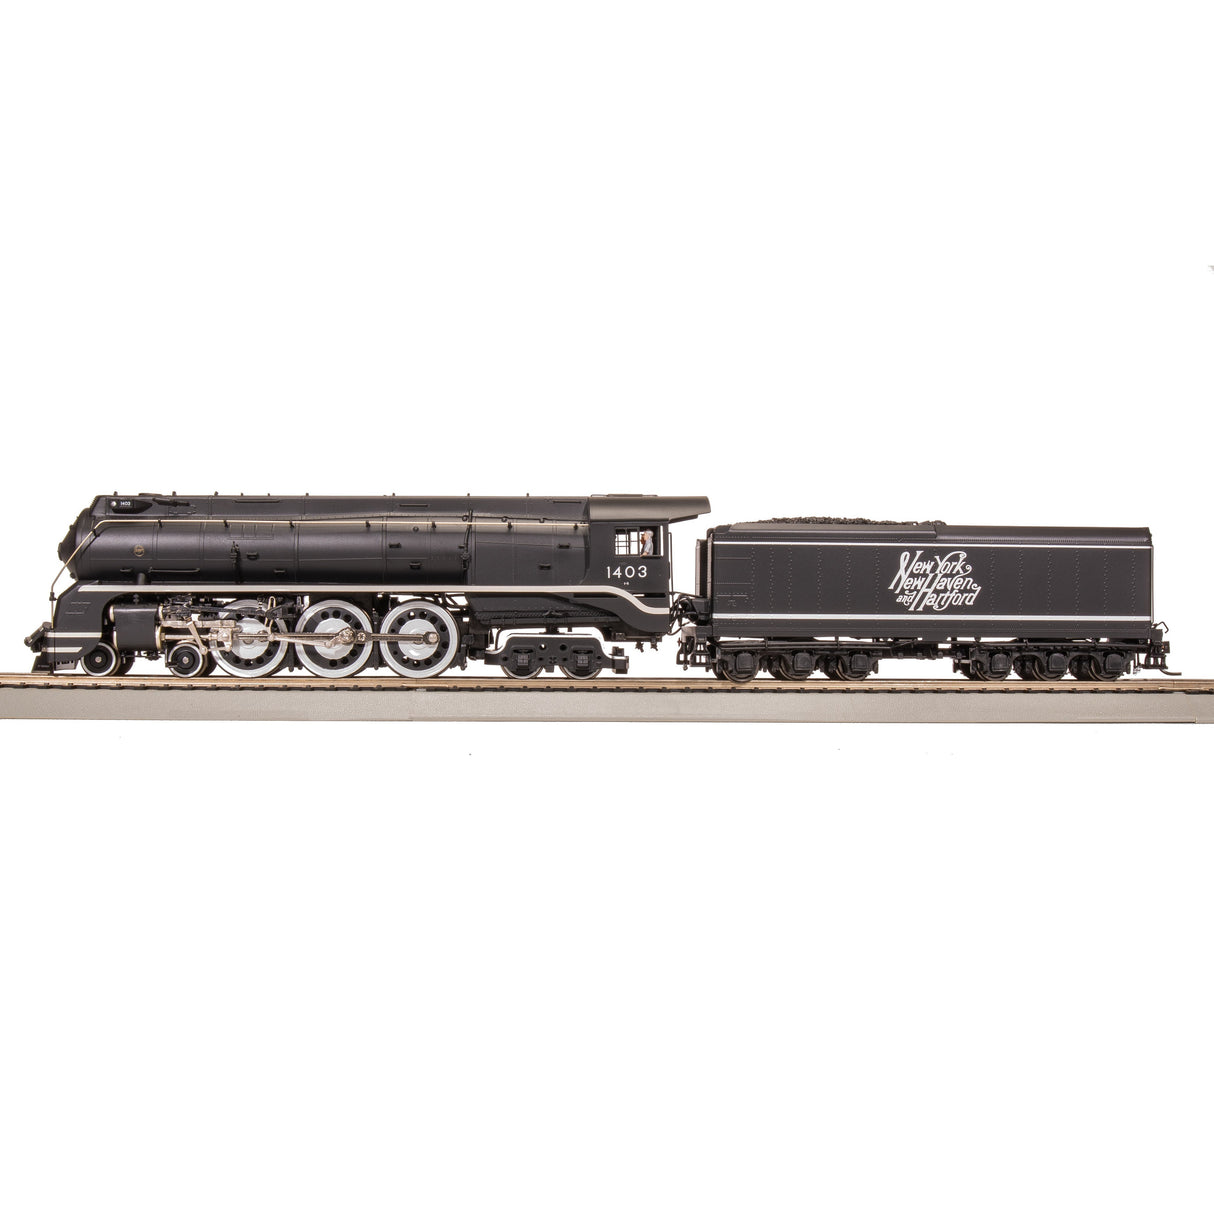 Broadway Limited HO Scale HY NH I-5 4-6-4 Steam Locomotive #1403/Large Script DC/DCC Southernn